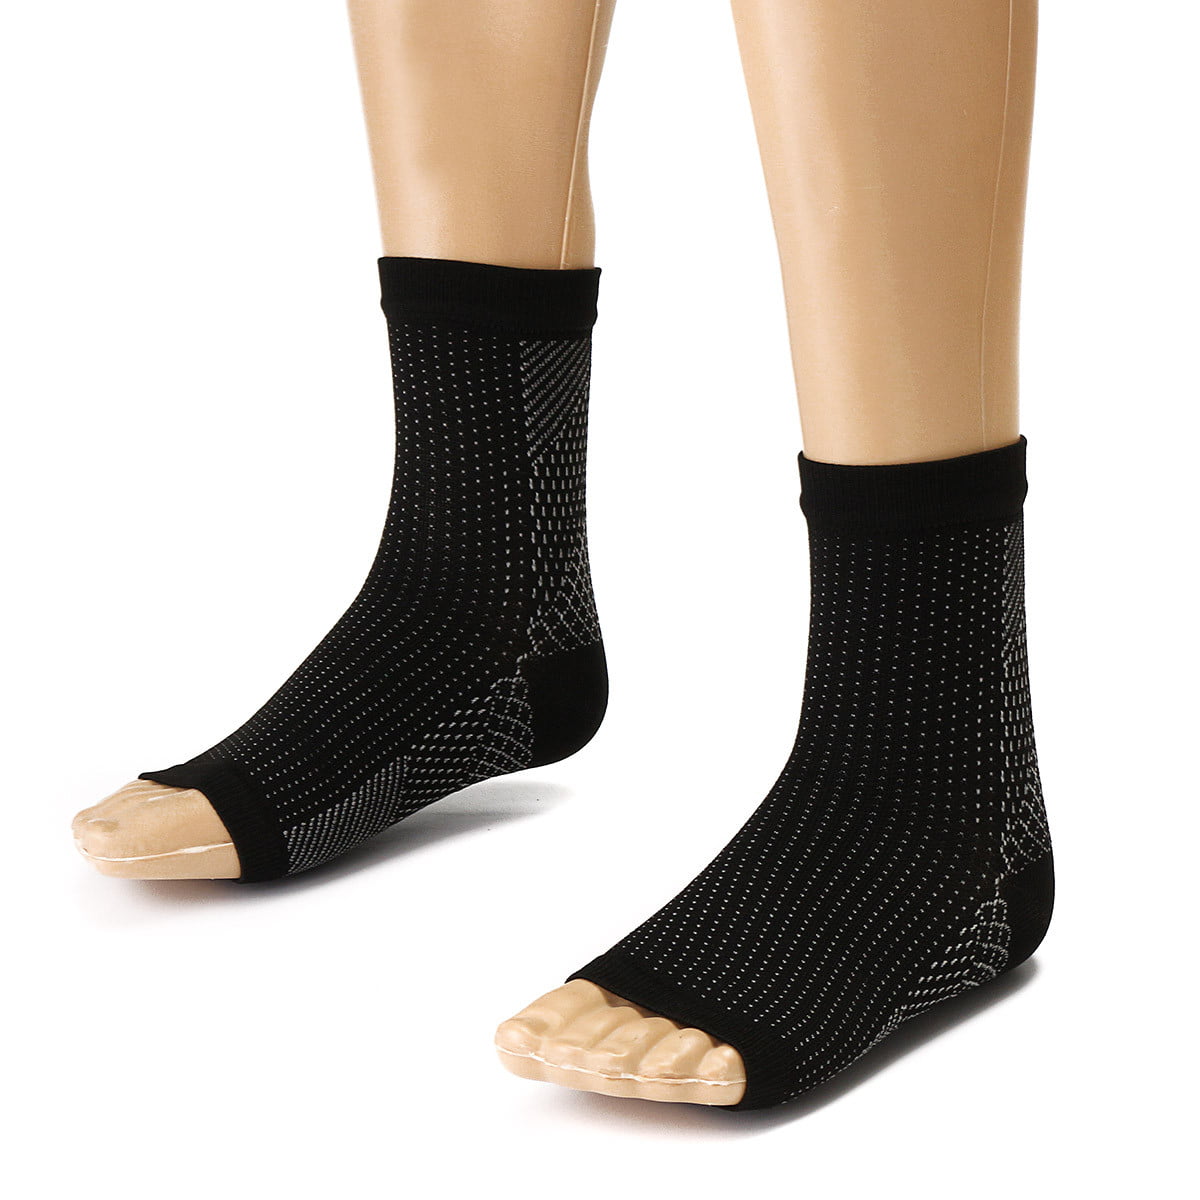 6-Pack Athletic or Medical Men’s Compression Socks Graduated Muscle Support 